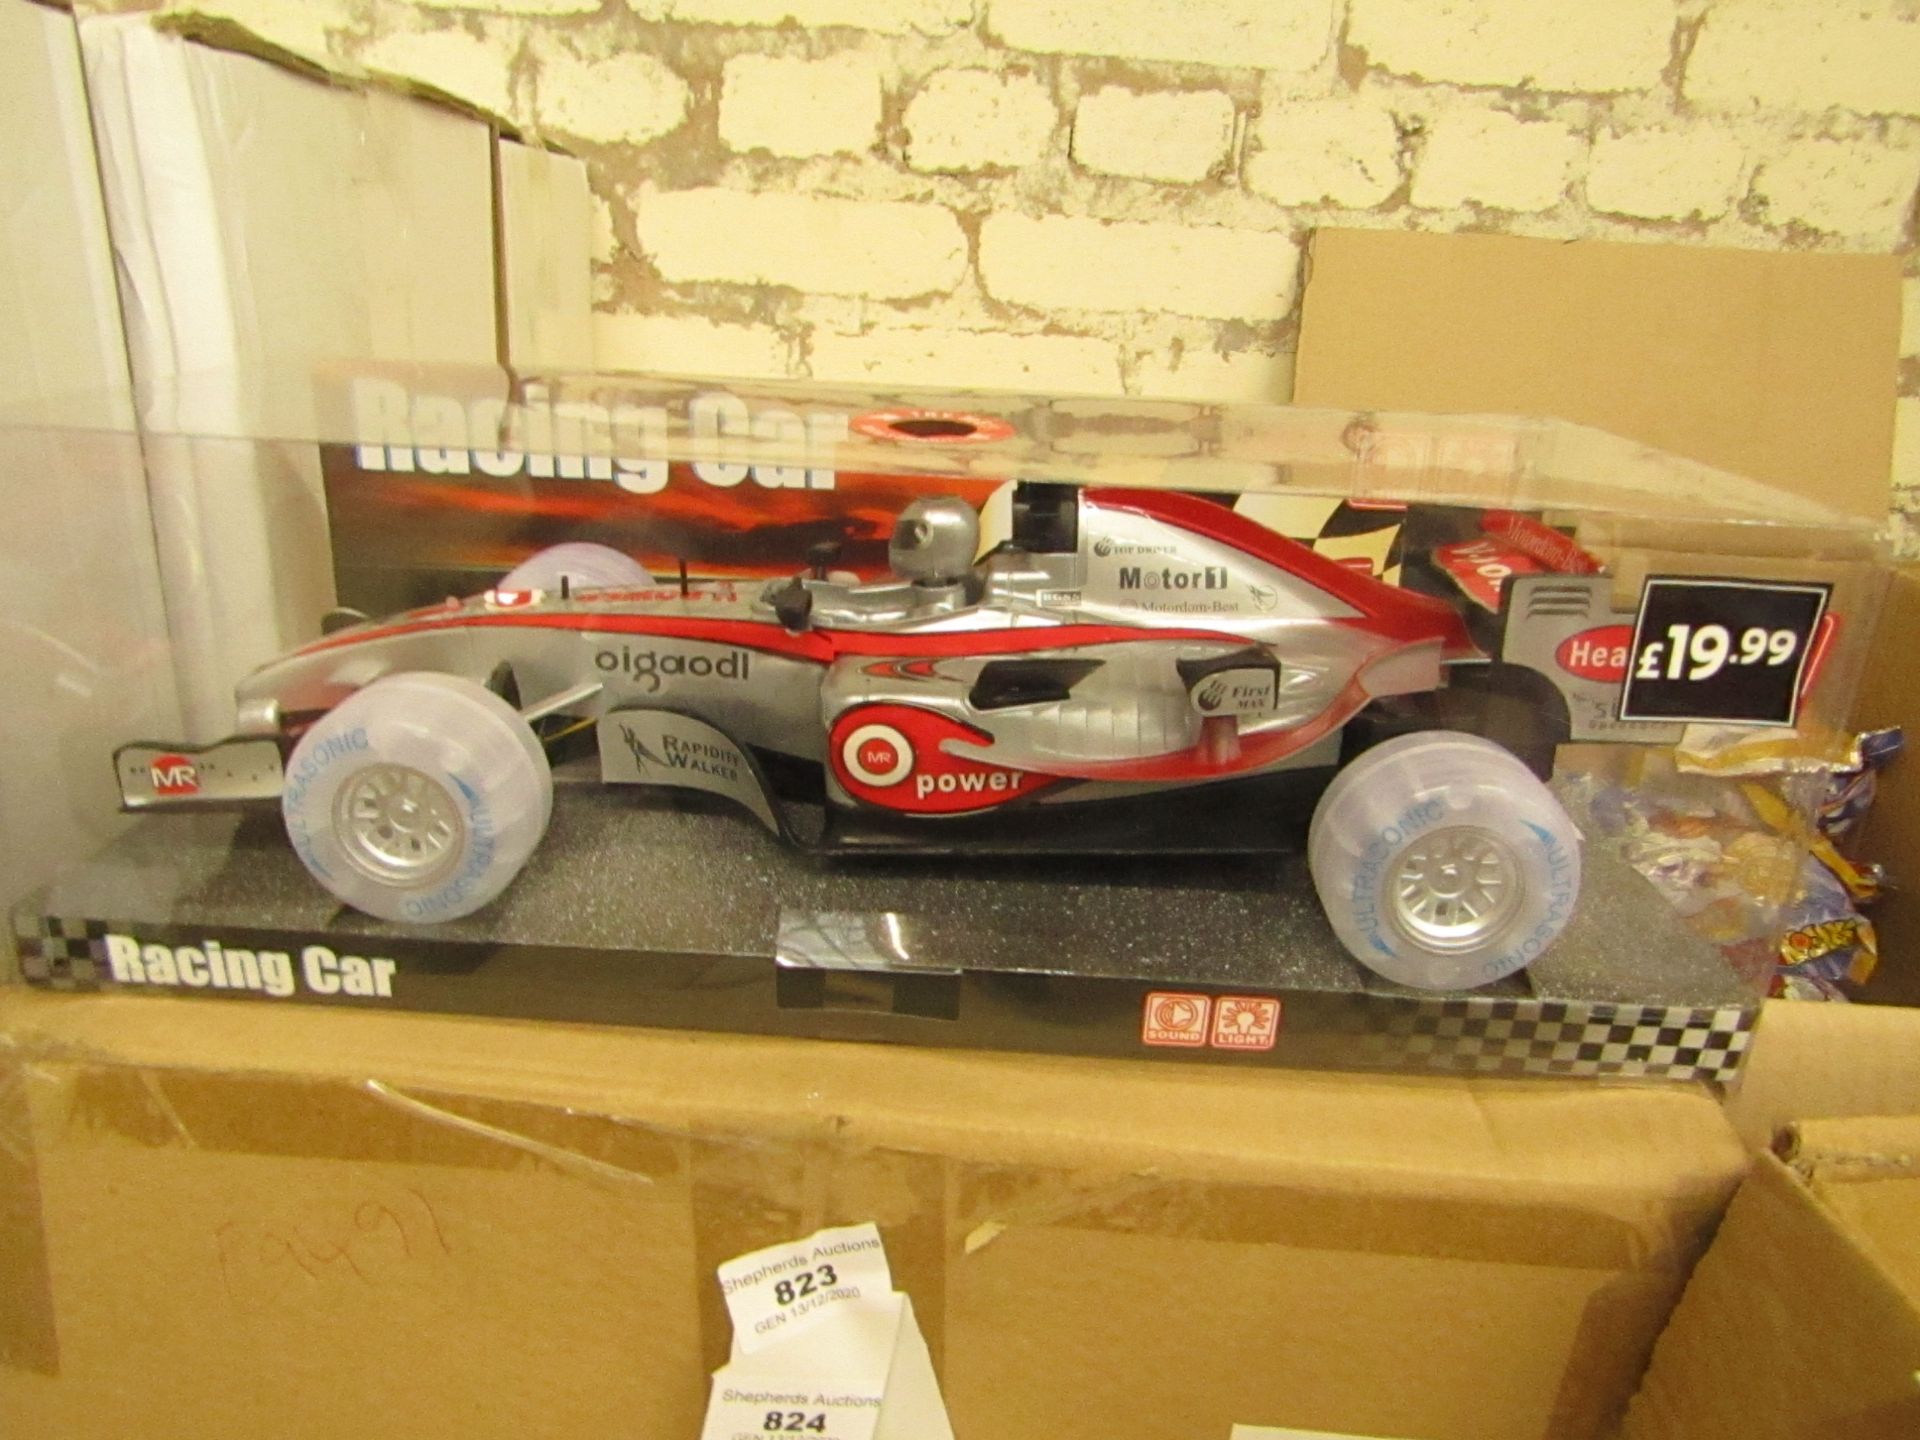 Lights and sounds Racing car, unused in packaging.